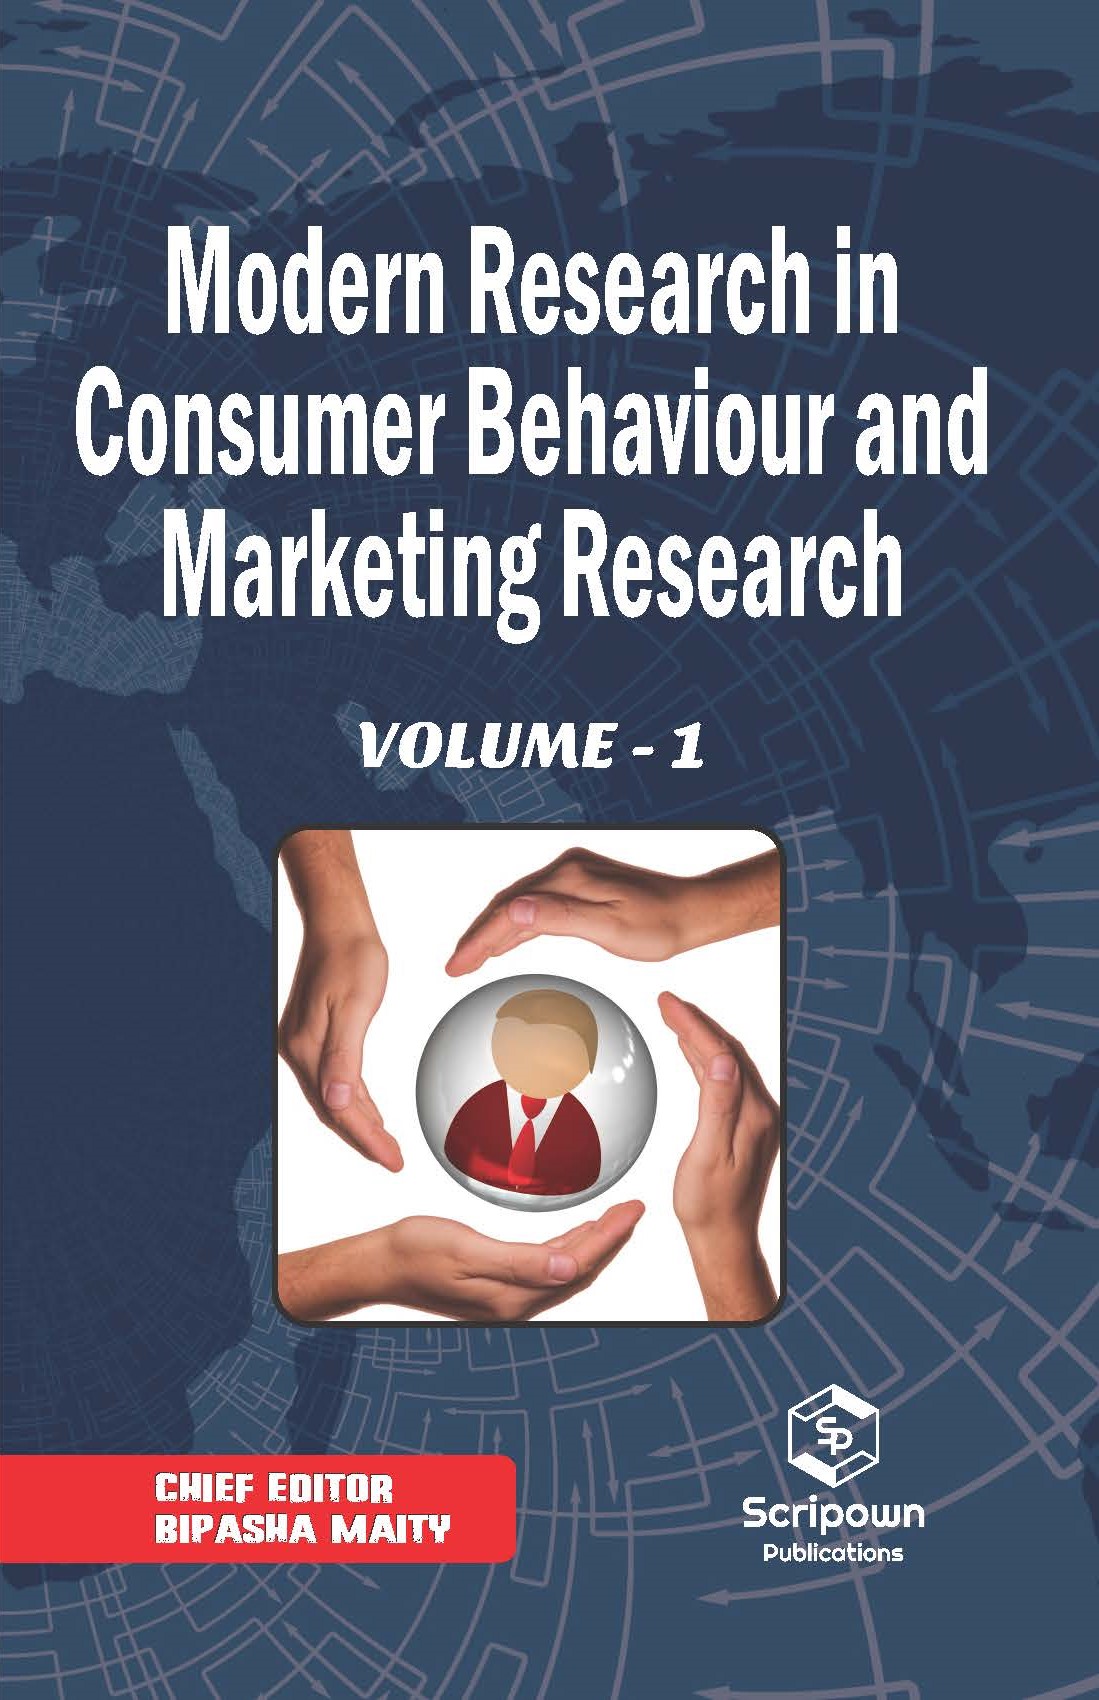 Modern Research in Consumer Behaviour and Marketing Research (Volume - 1)